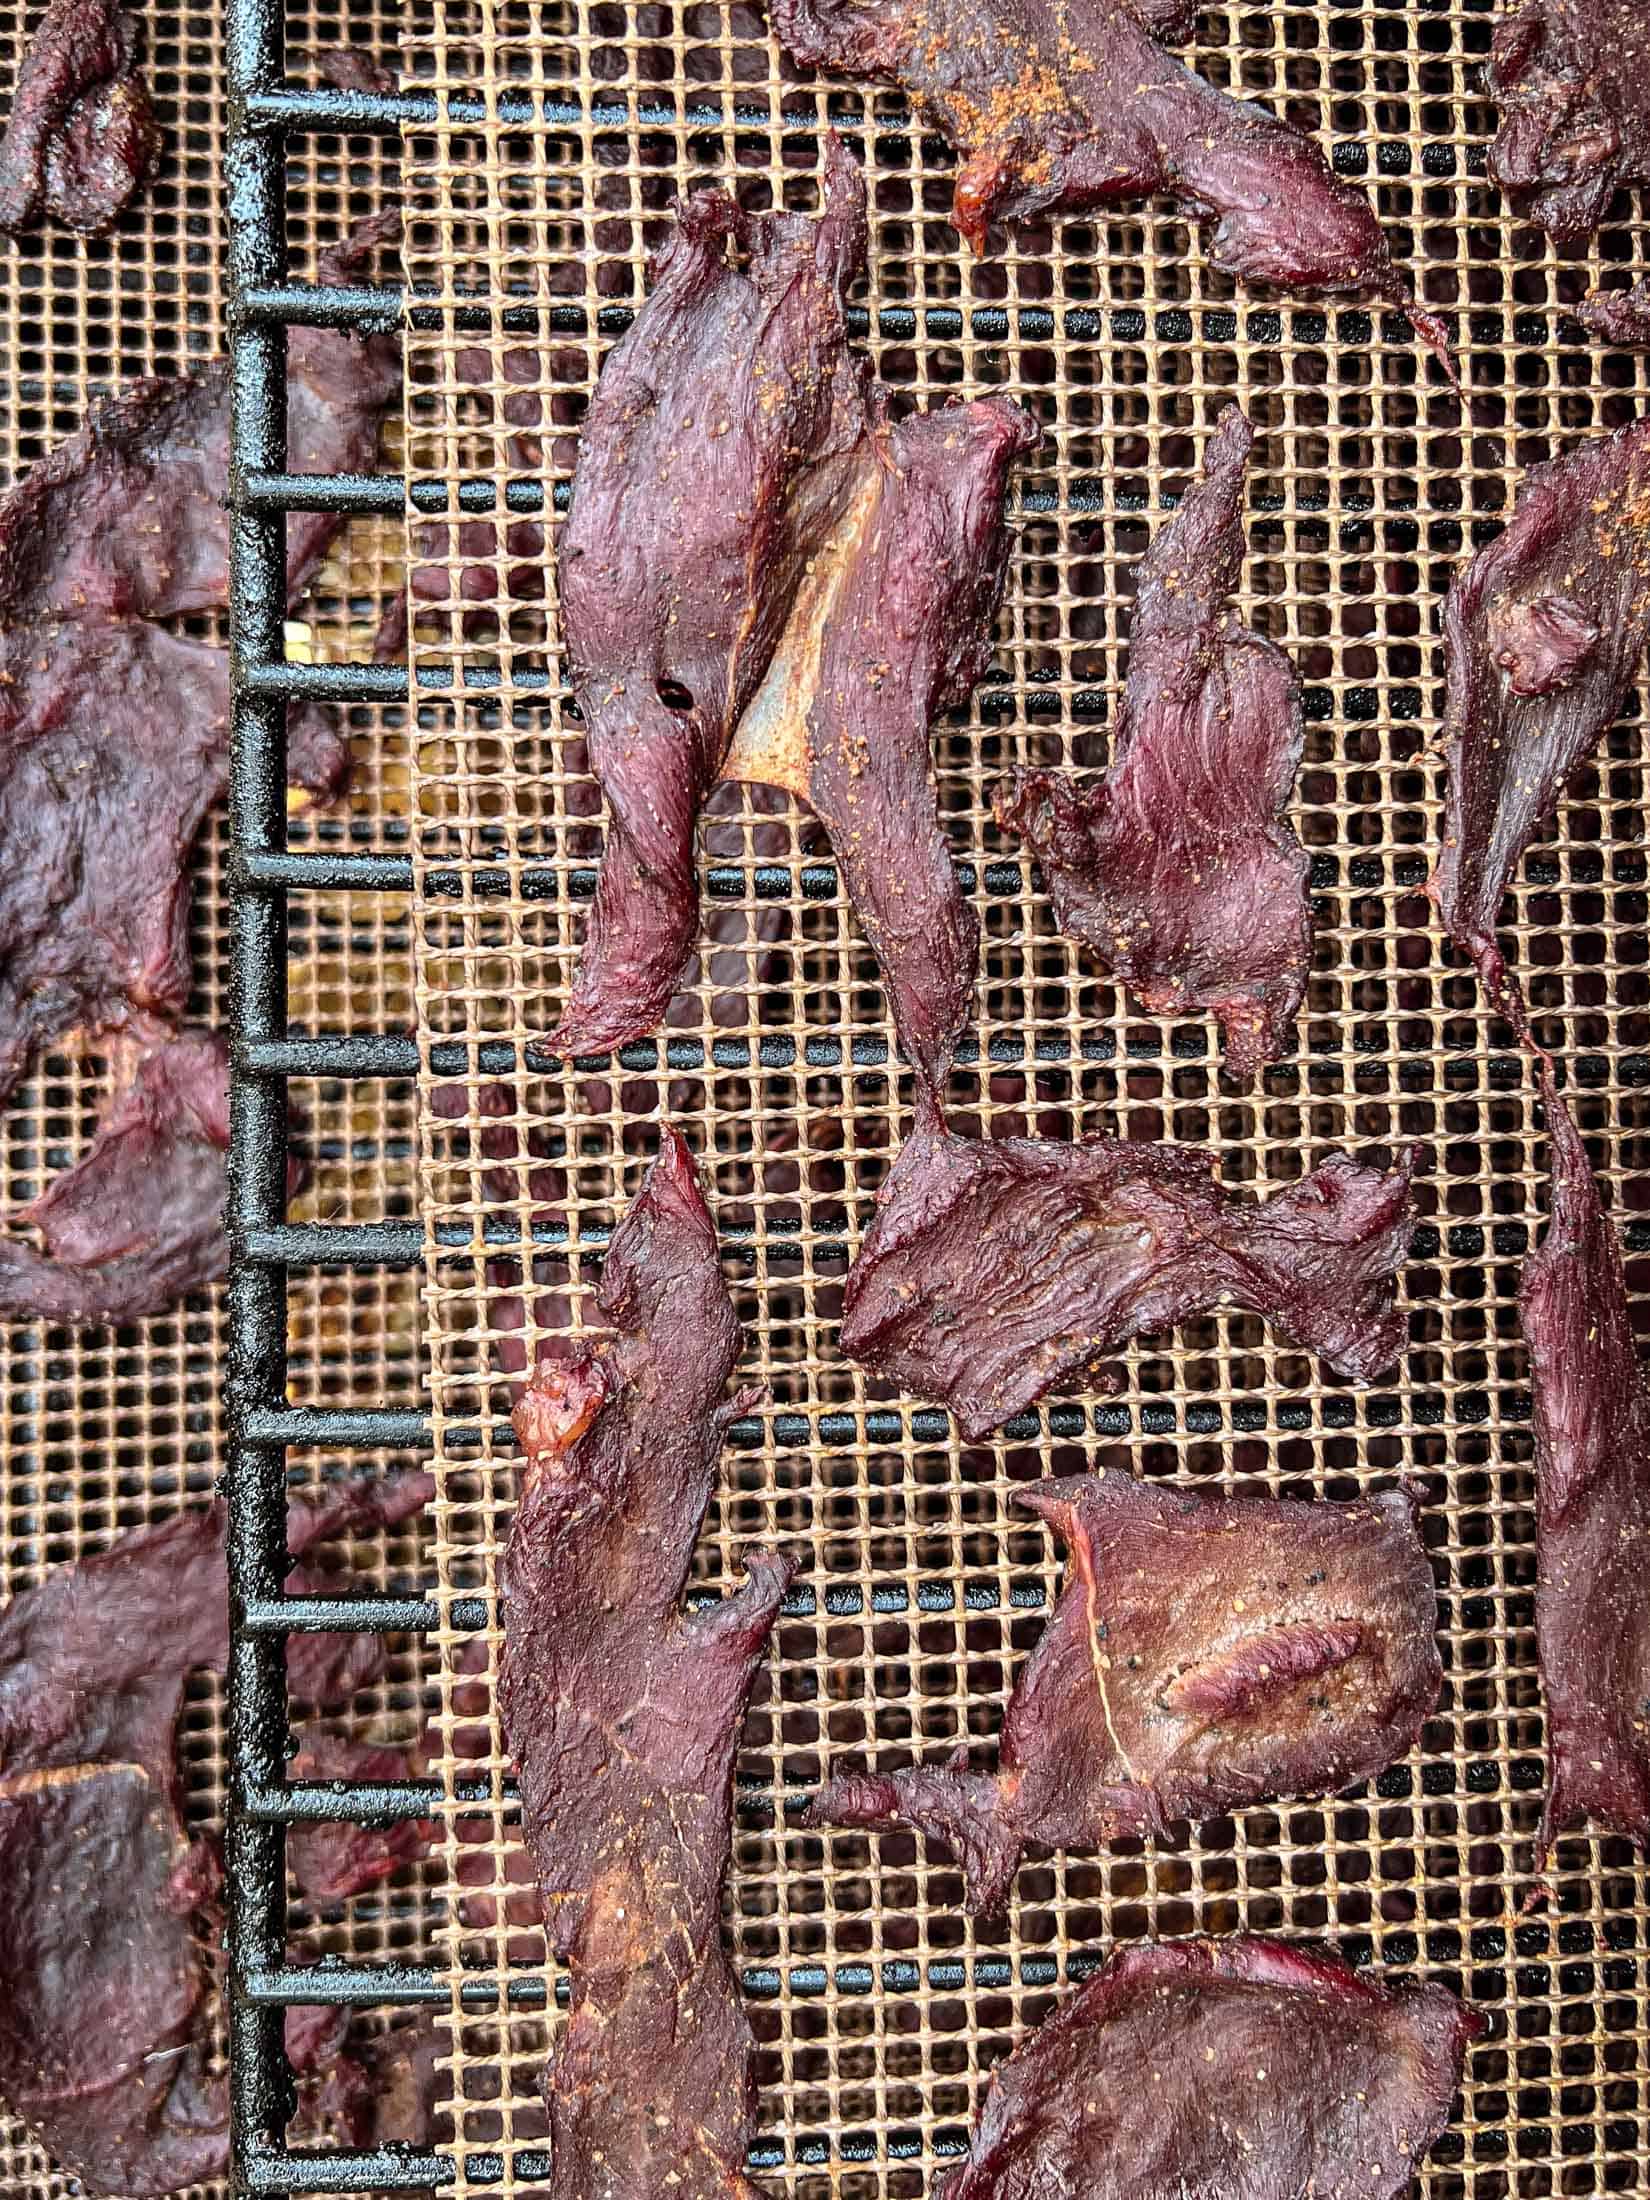 Fully cooked venison jerky on a grill mat on a pellet grill.